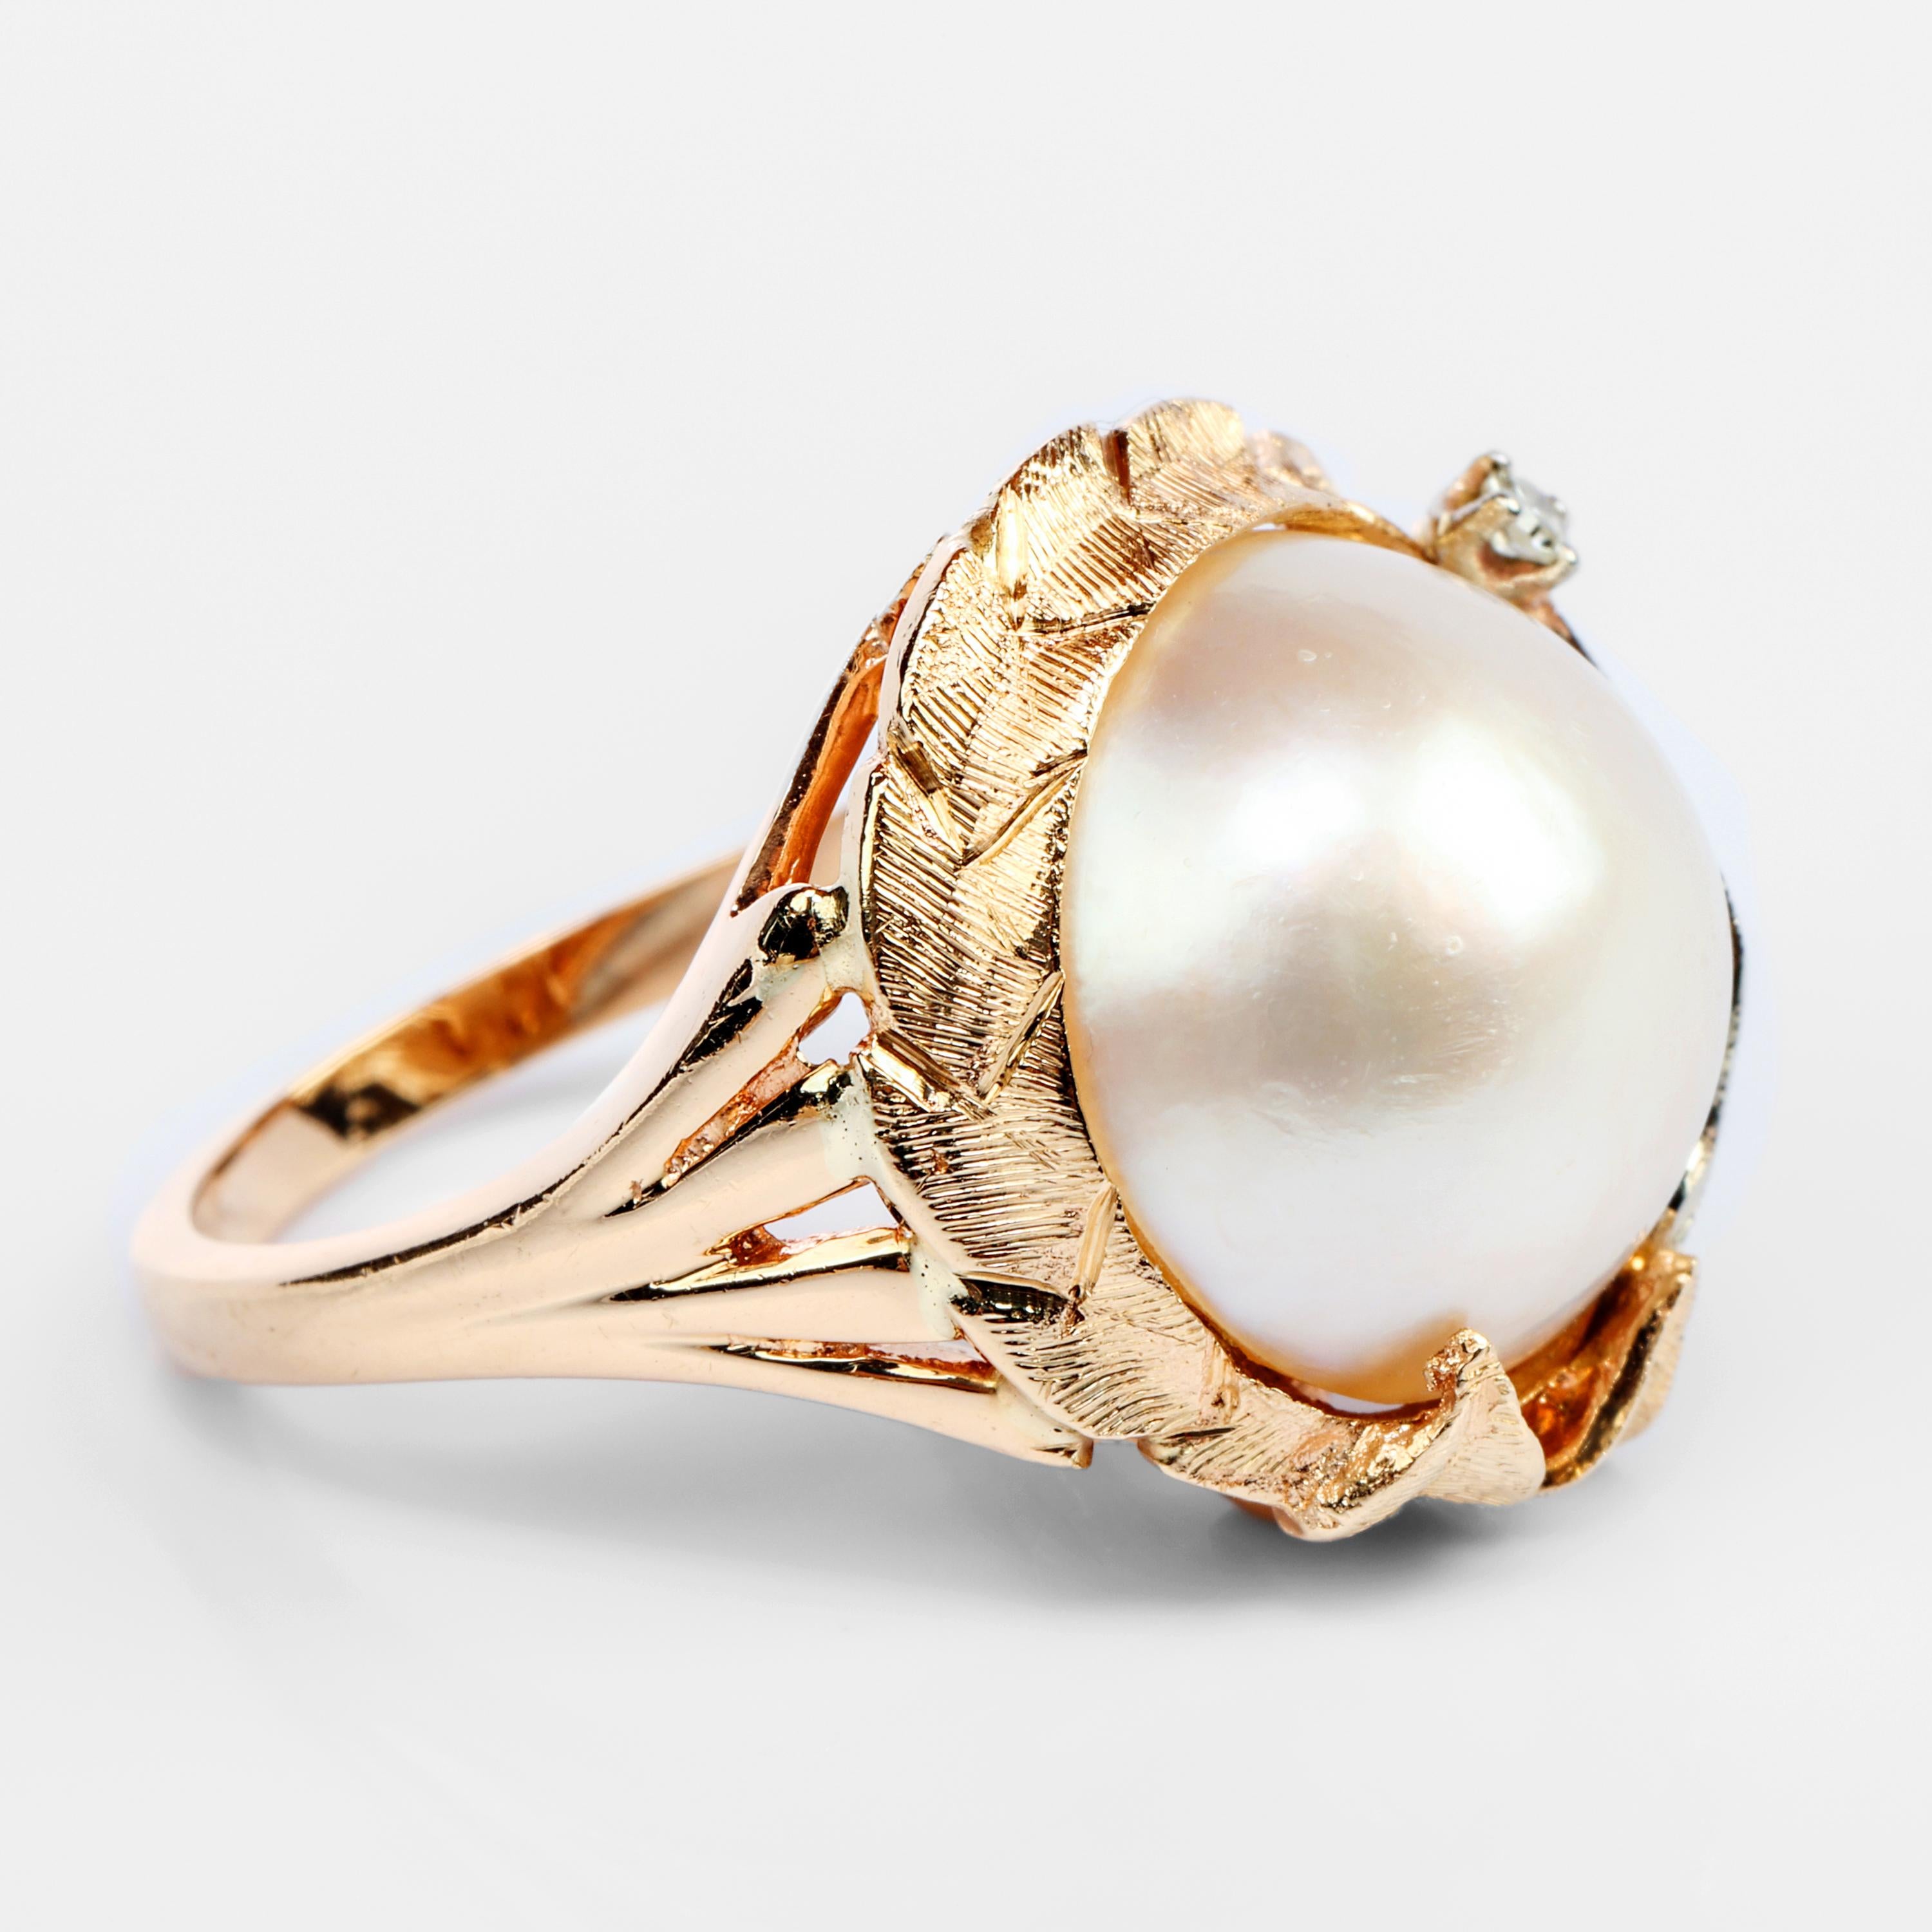 Created in the 1960s by New York designer, Harold Freeman, this retro-inspired ring is a little whirlwind of Hollywood glamour. Crafted in rich 14k yellow and white gold, the large (14.25 mm) mabe pearl is surrounded by a sort of frame of etched